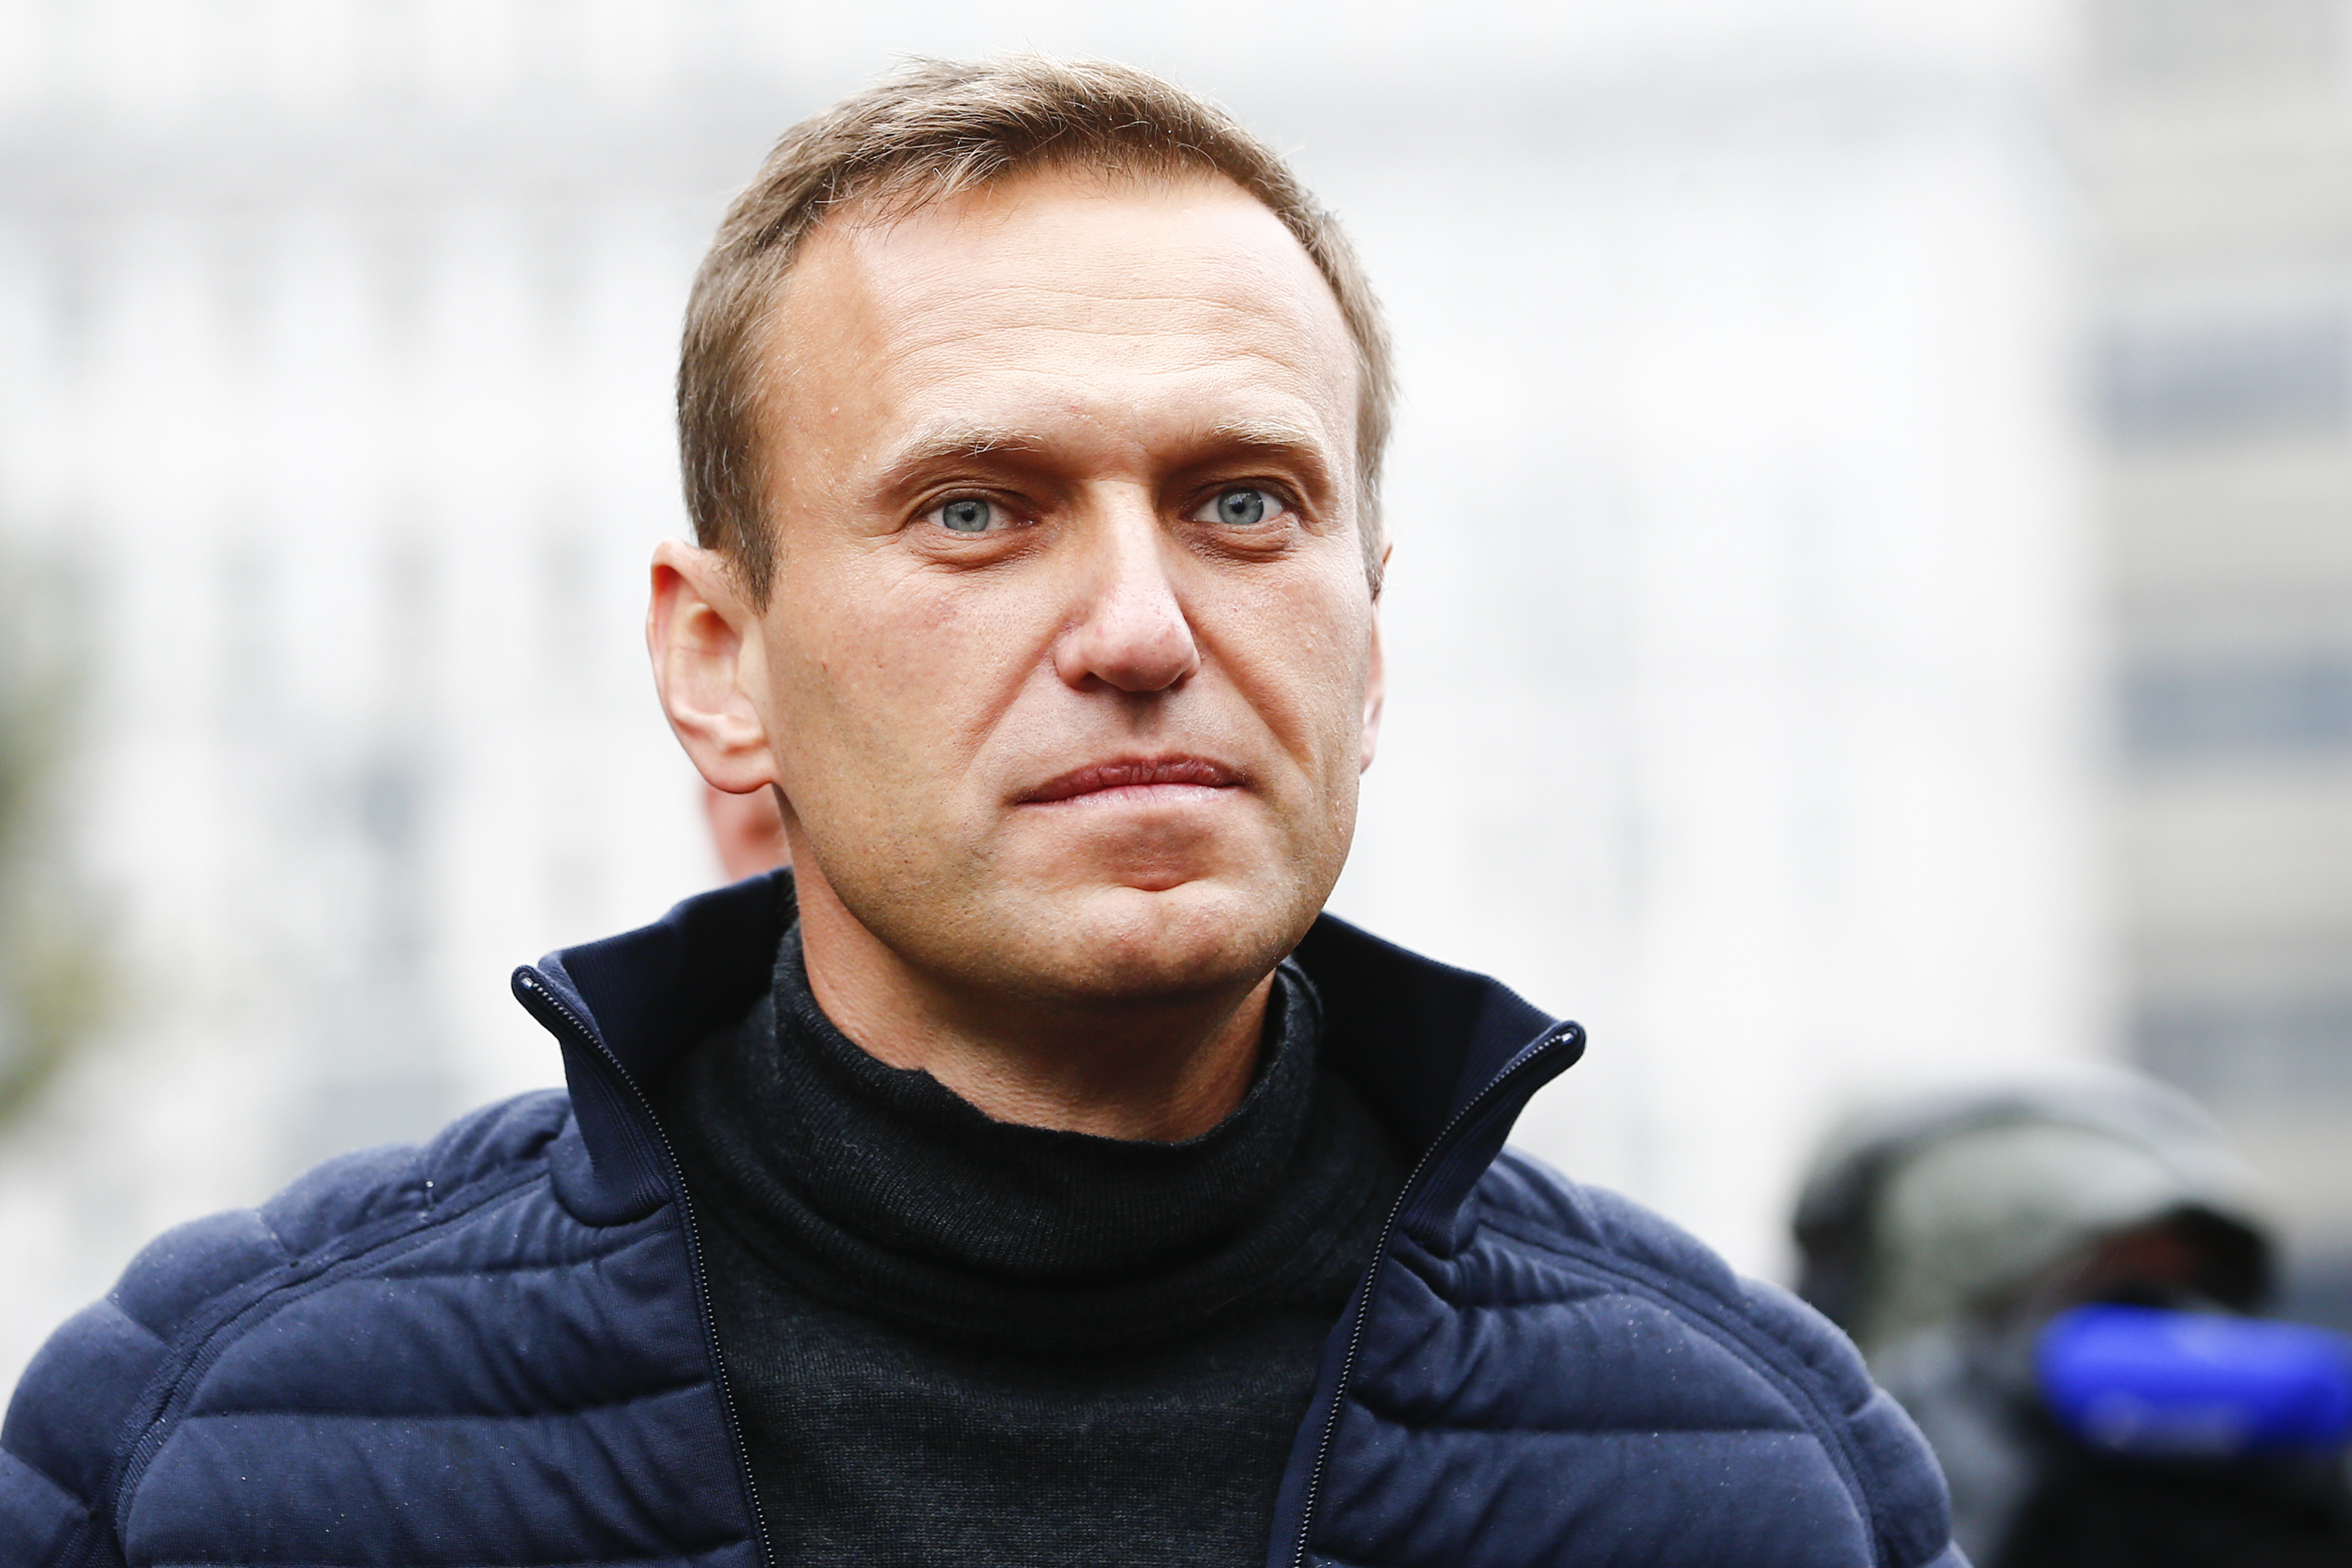 Russia: Fears of prisoner of conscience Aleksei Navalny forcibly disappeared